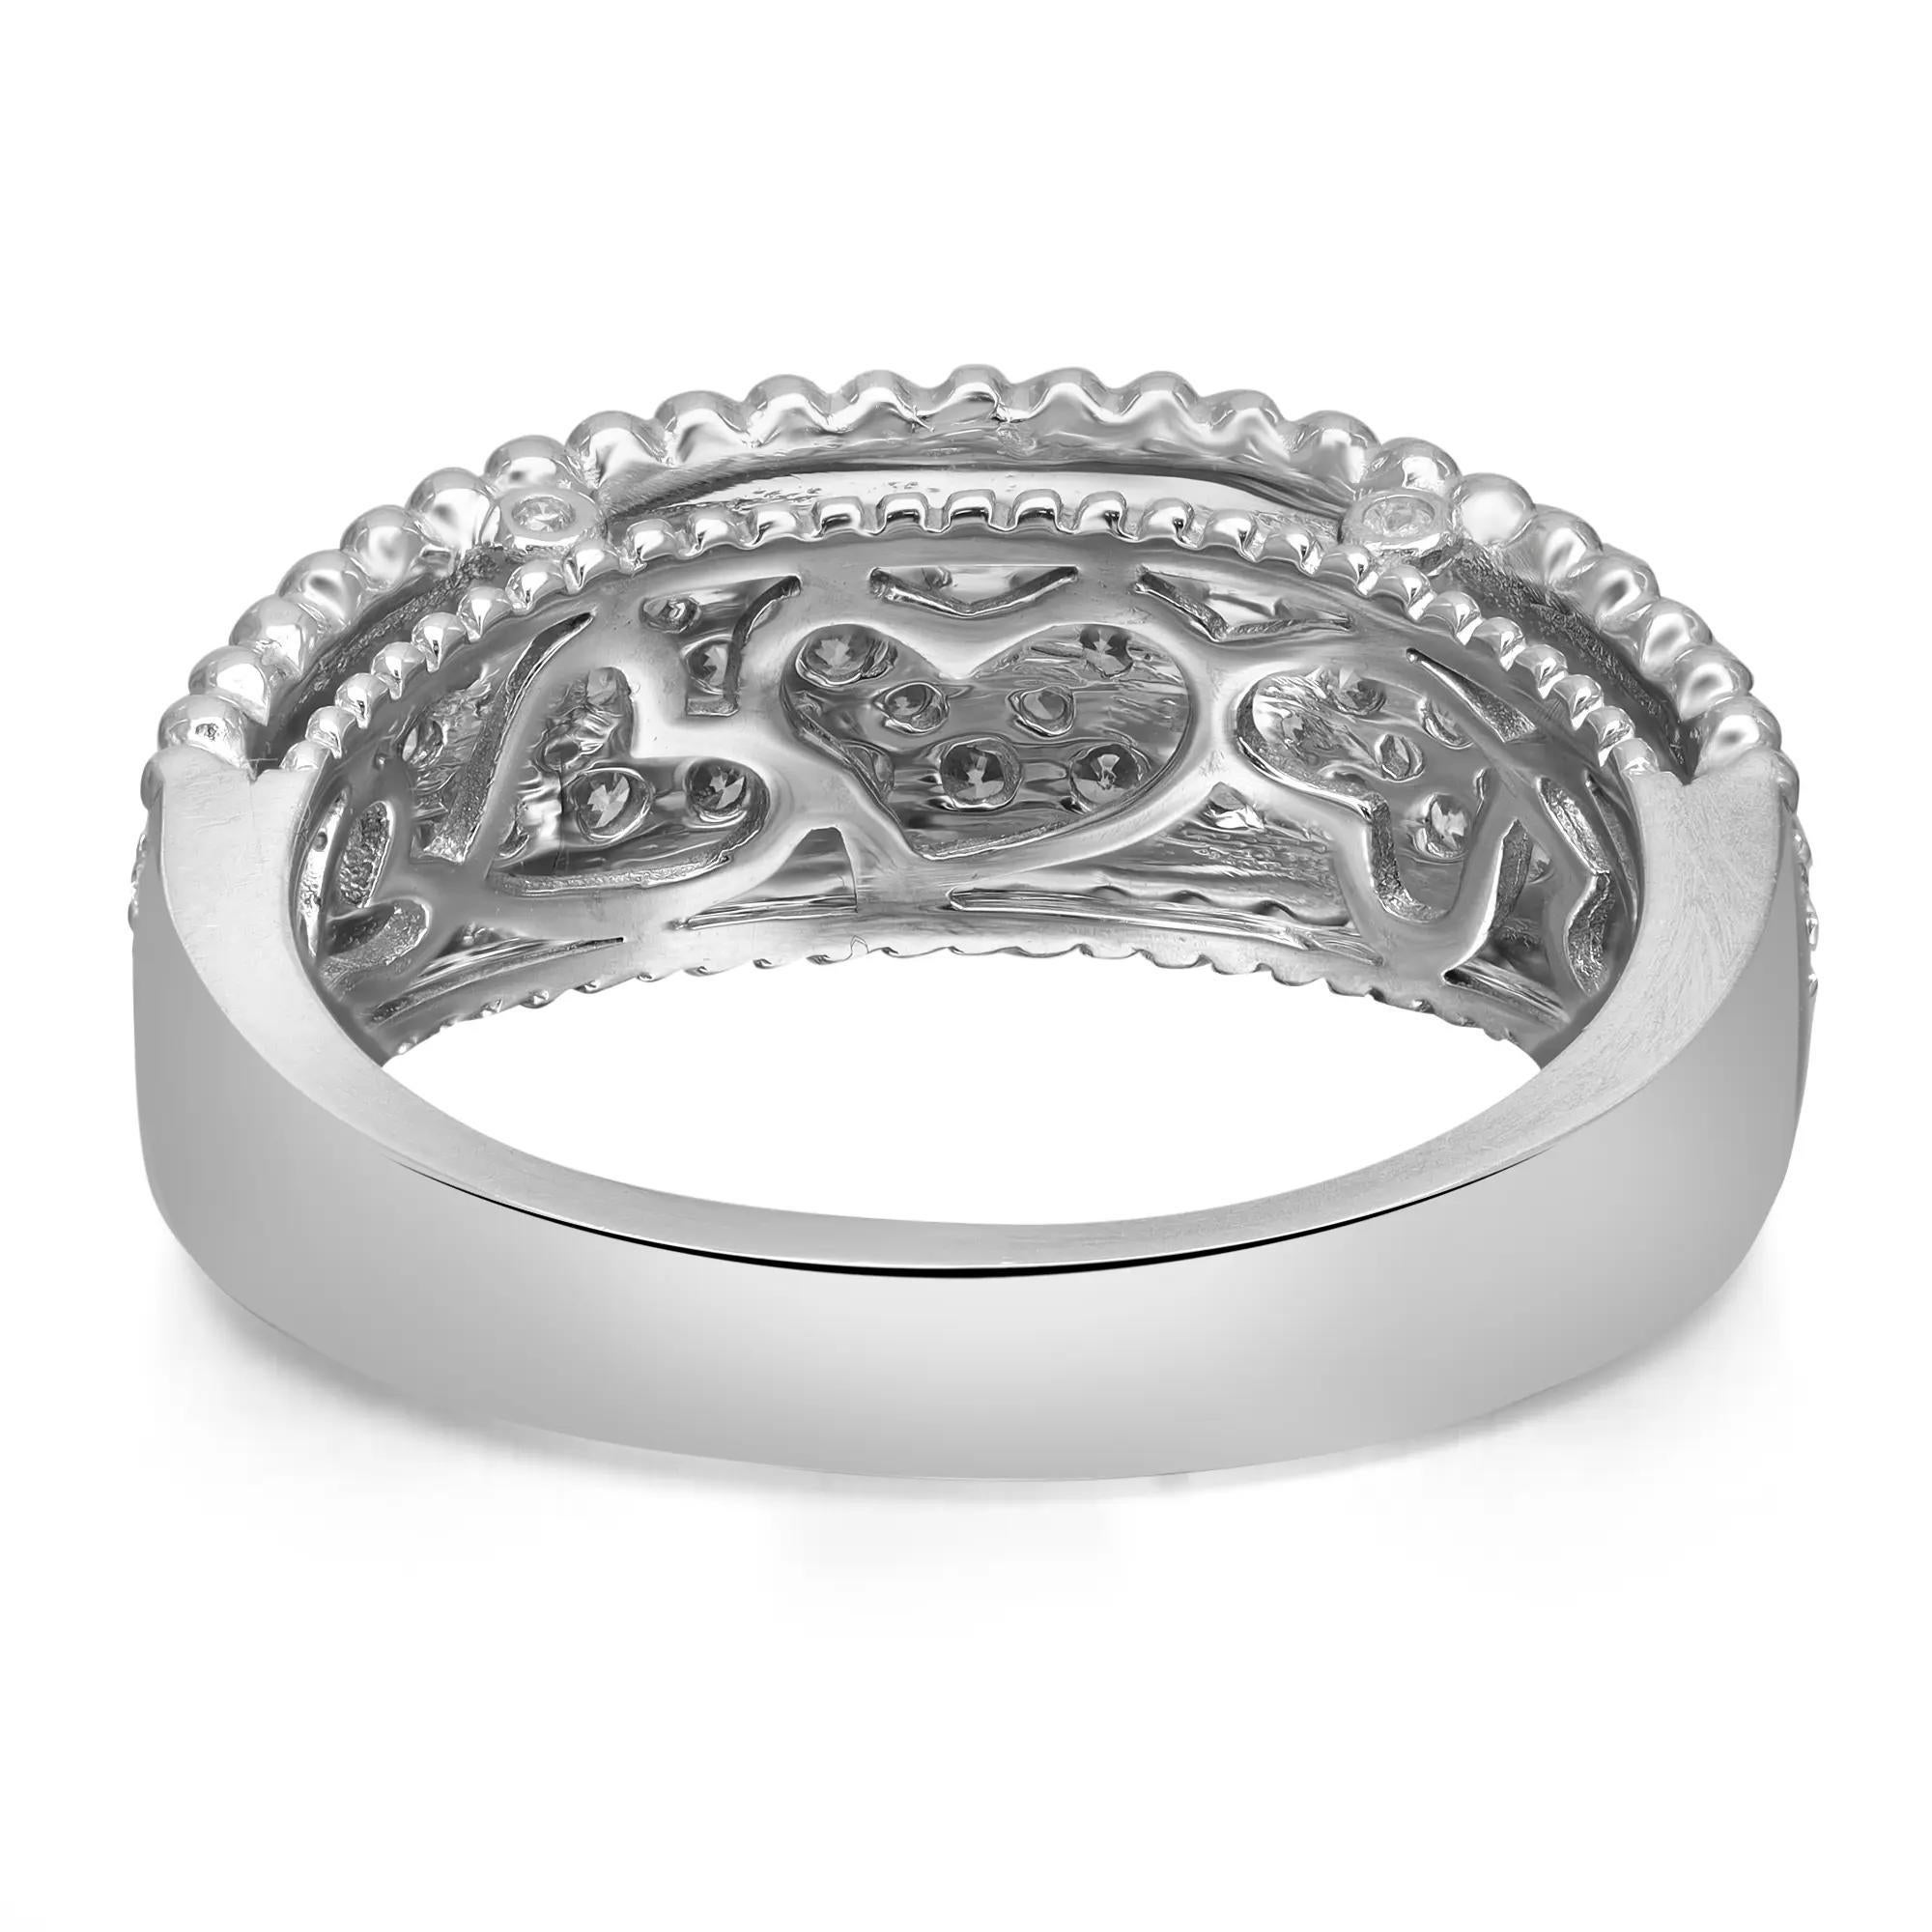 Chic and stylish, diamond ladies ring band adorned with pave set round brilliant cut diamonds weighing 1.00 carats. Diamond quality: I color and SI clarity. This ring makes a great gift for someone special. Crafted in highly polished 14K white gold.